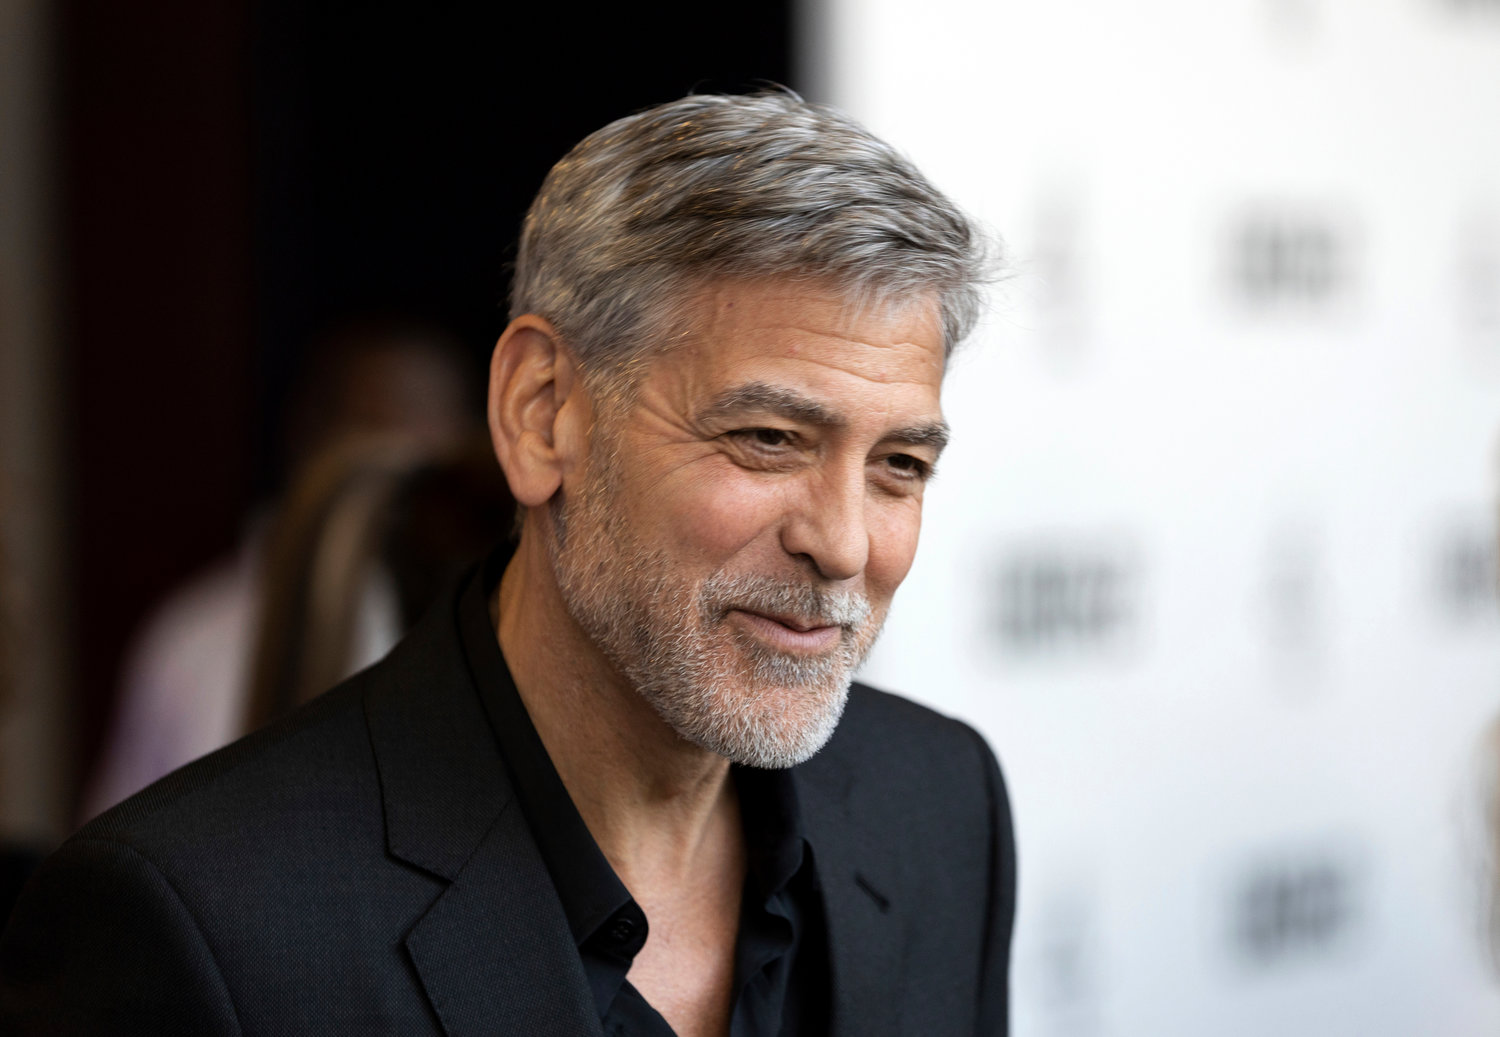 HONOREE — AARP is honoring George Clooney with the career achievement award at its annual Movies for Grownups Awards.